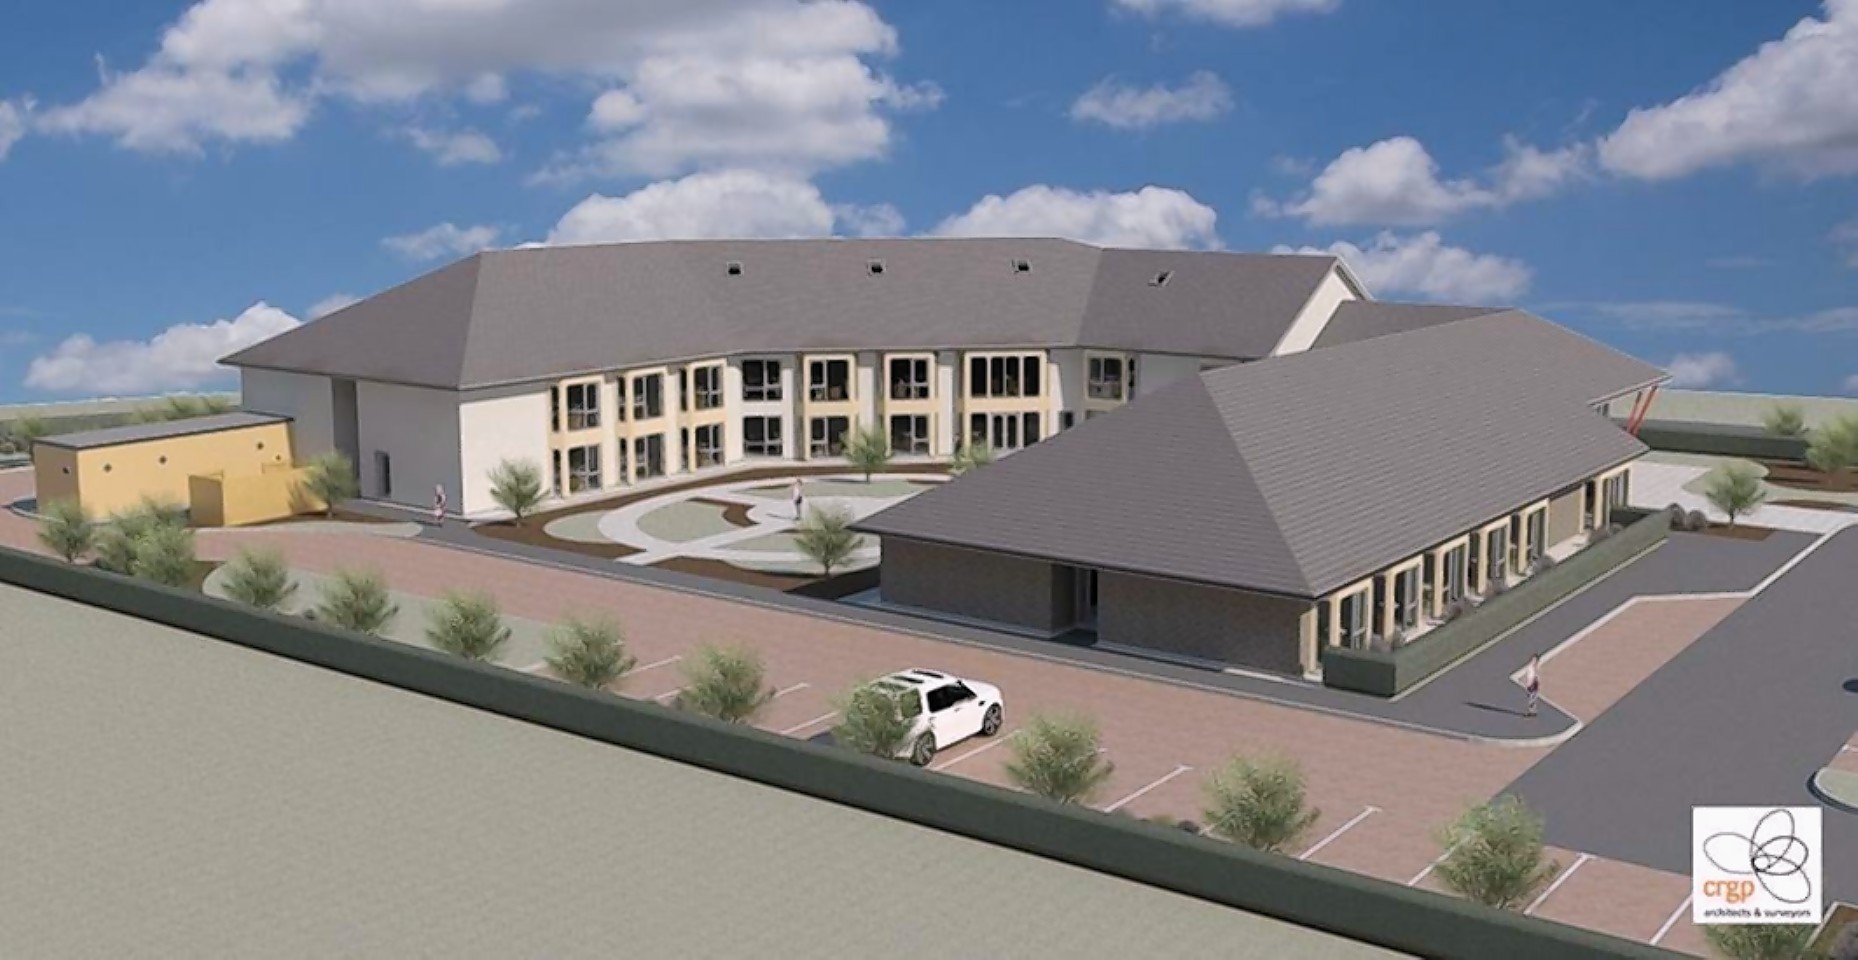 An artists impression of the proposed care home from the previous planning application